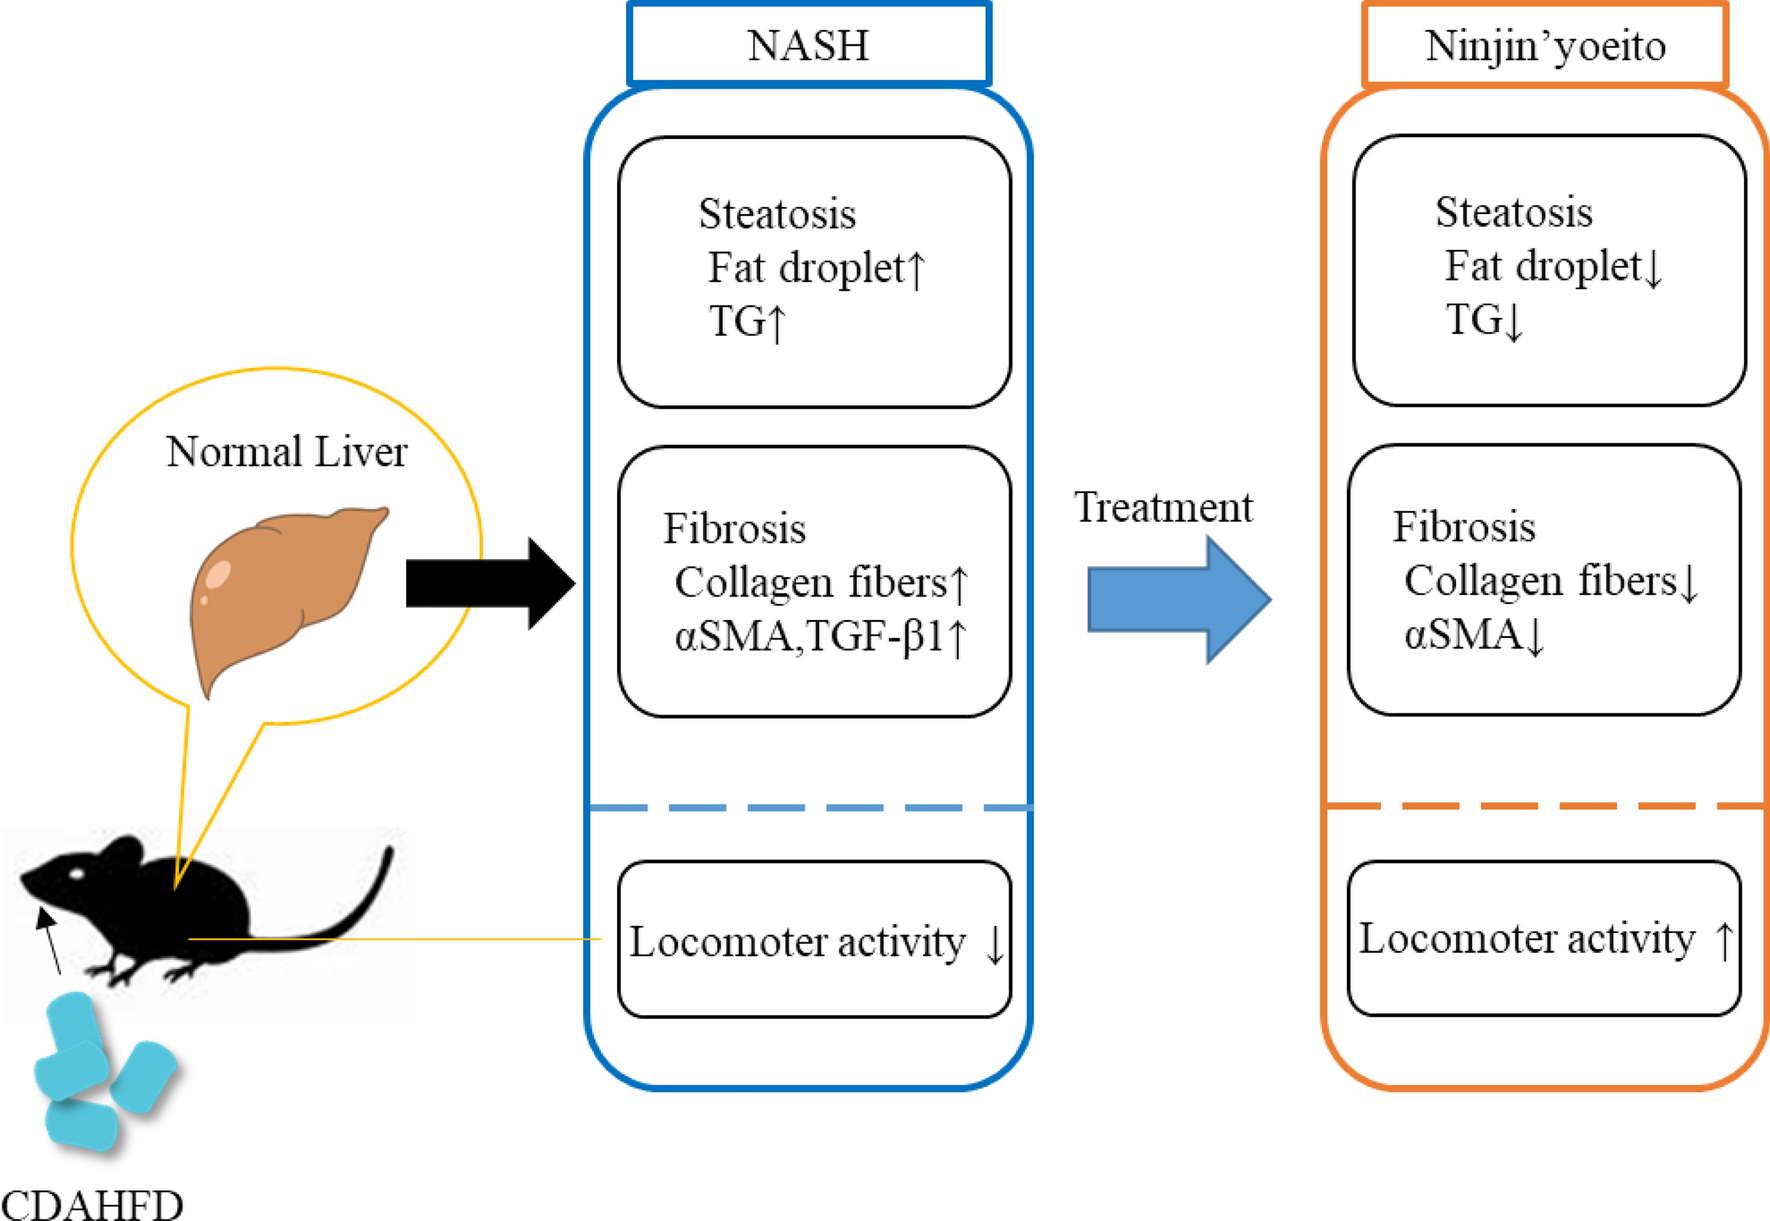 The protective effects of Ninjin’yoeito against liver steatosis/fibrosis in a non-alcoholic steatohepatitis model mouse